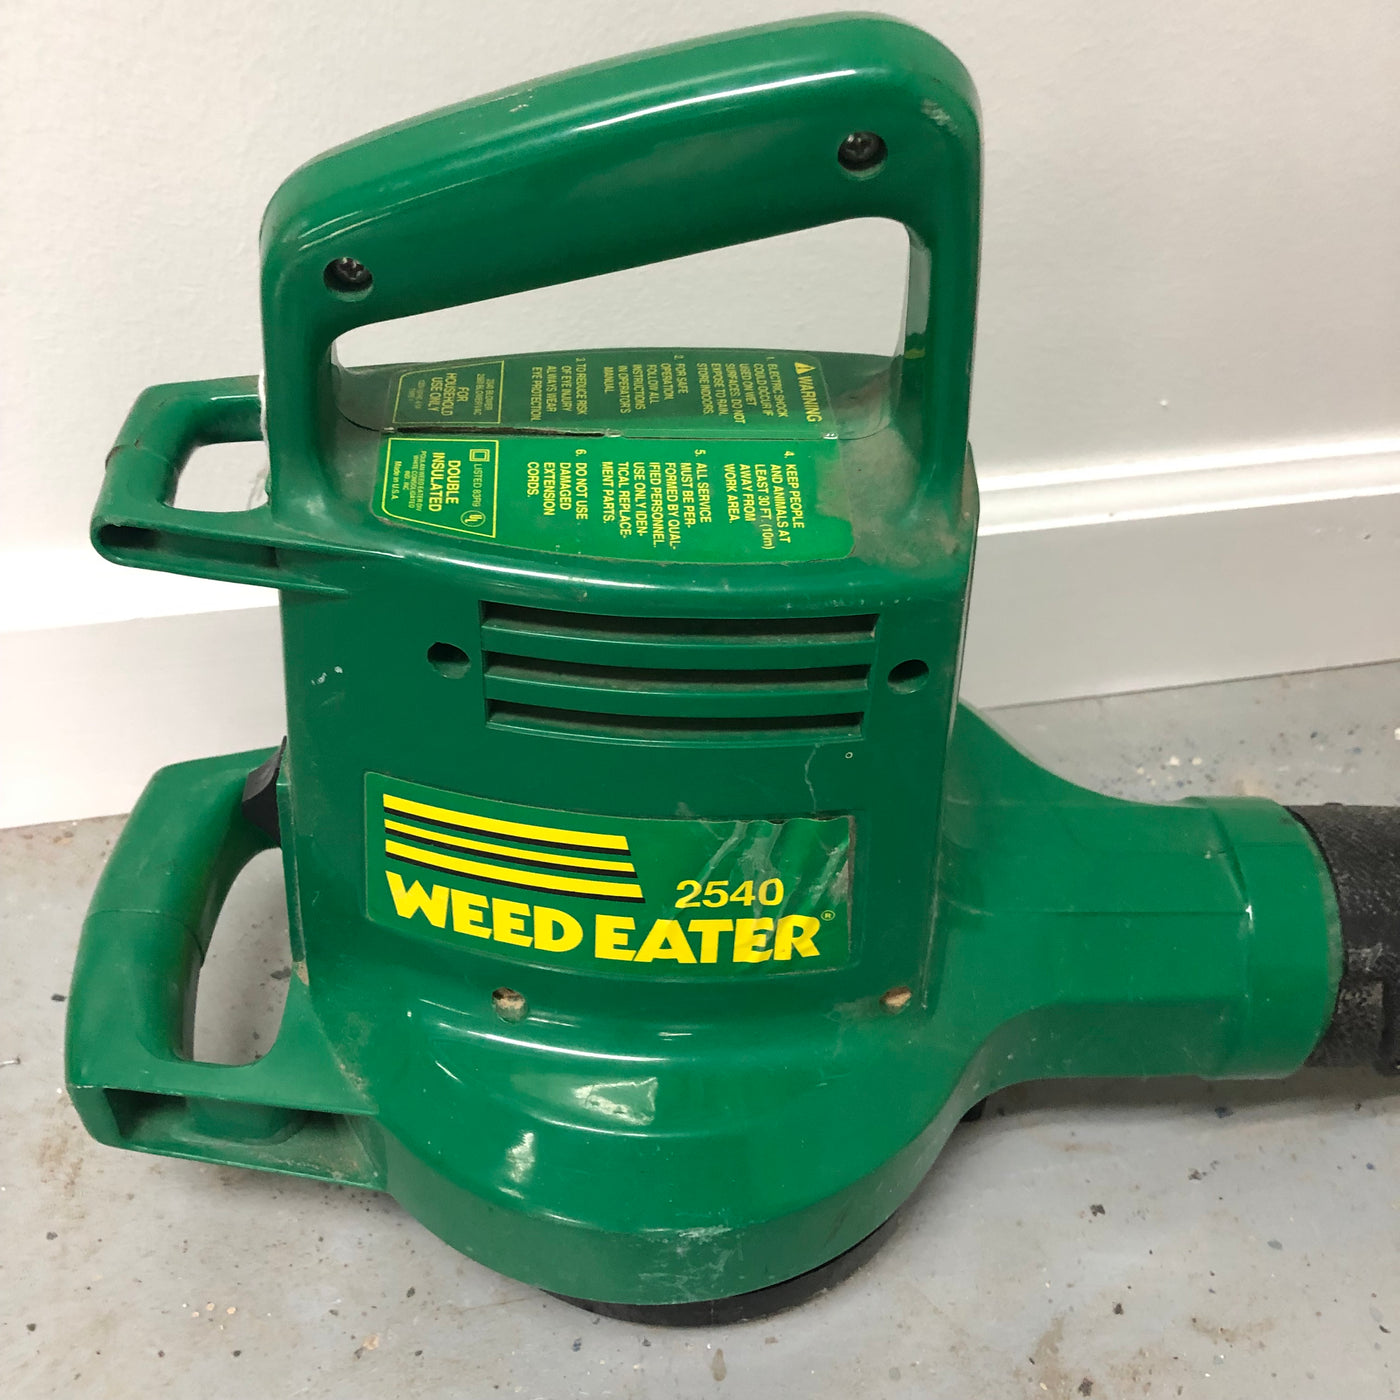 battery powered leaf blower and weed eater